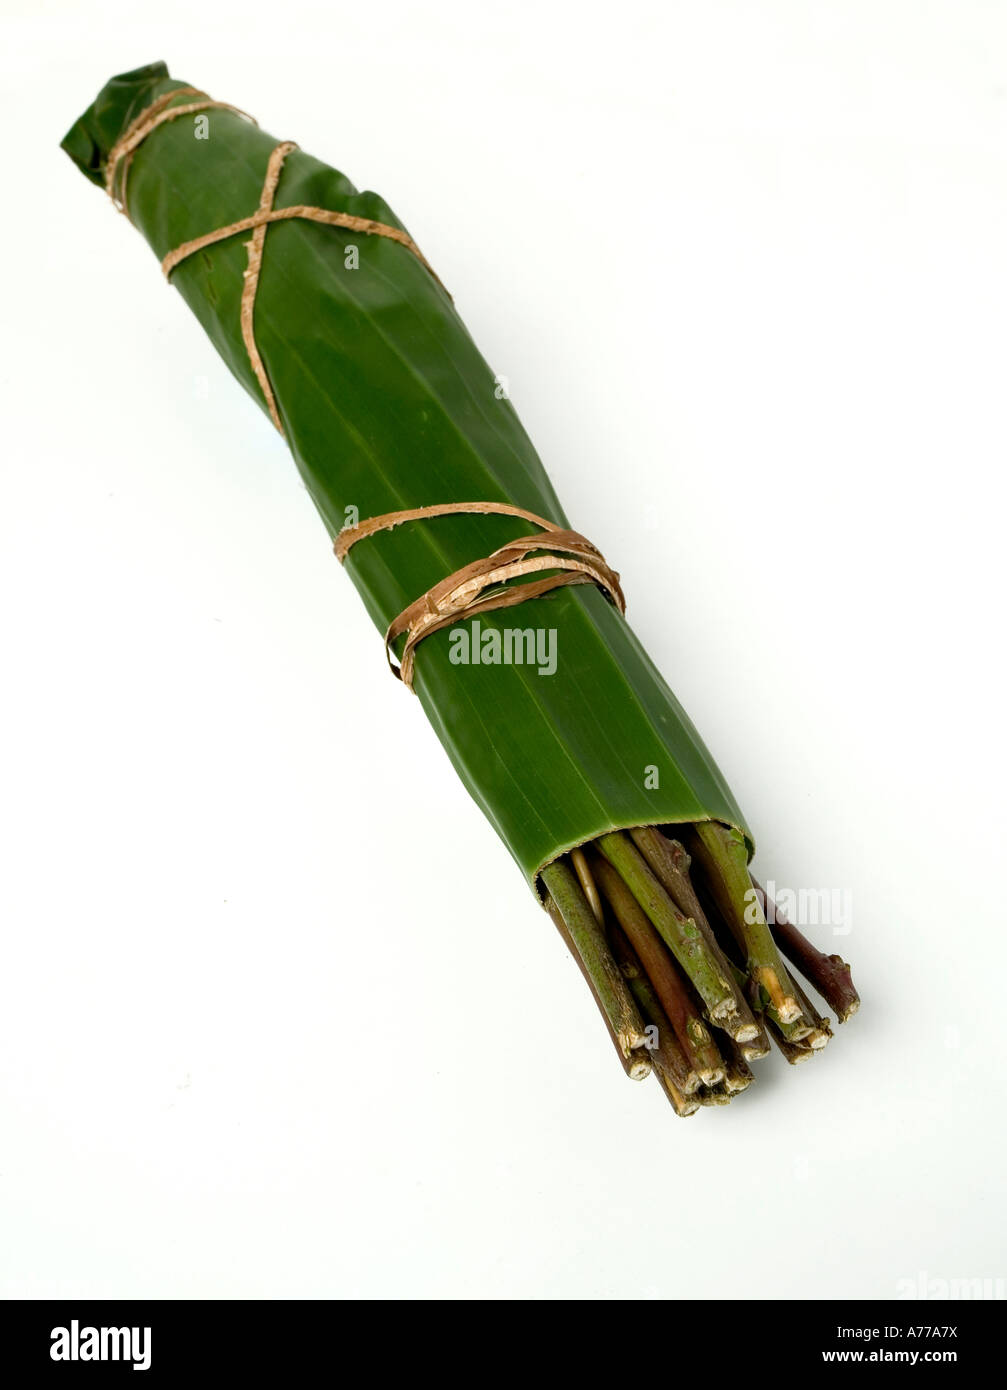 A wrapped bunch of Khat or Qat or Gat. Legally sold for £5 GBP or $10 US a bunch in the UK. Stock Photo